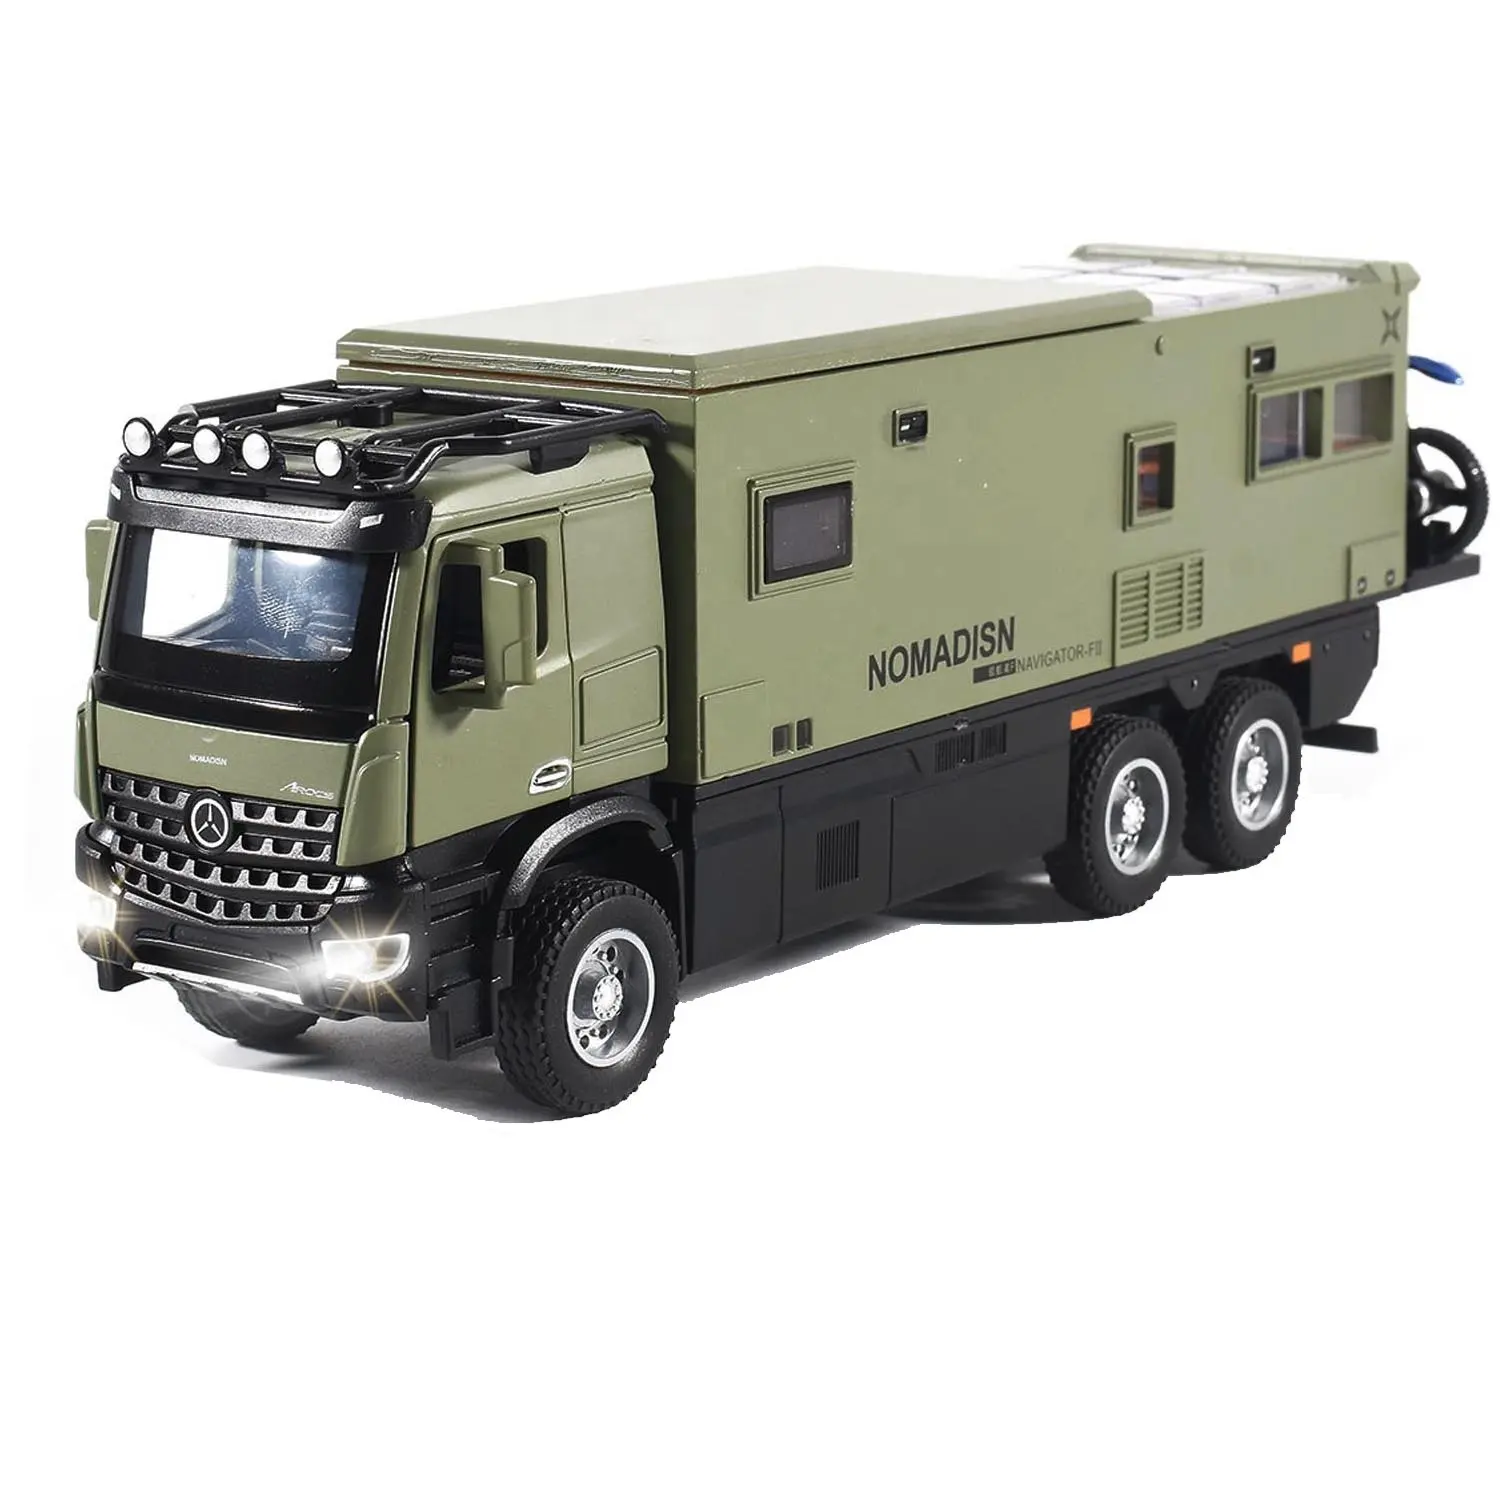 NEW 1:24 Nomadison Rv Die Cast Model Car with Door Opening Engine Hood & Trunk Opening,Pull Back Alloy Toy Car With Light Sound